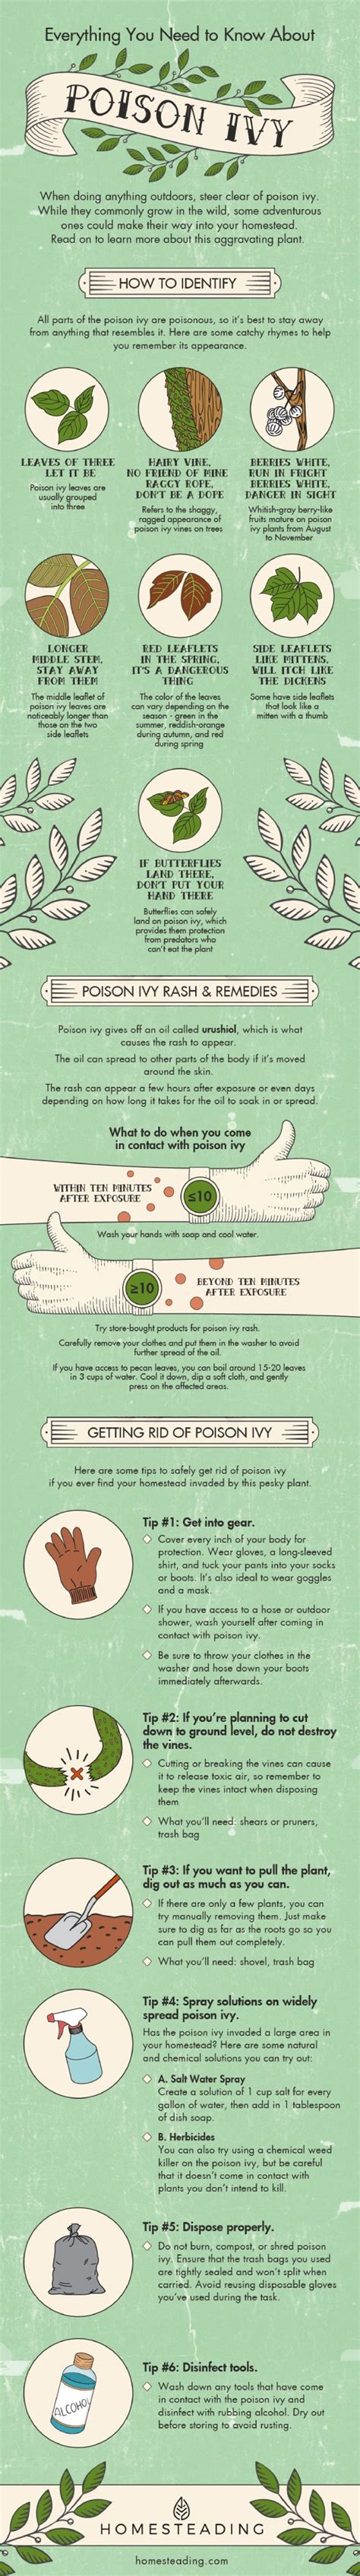 How To Identify Poison Ivy Homesteading Safety Tips